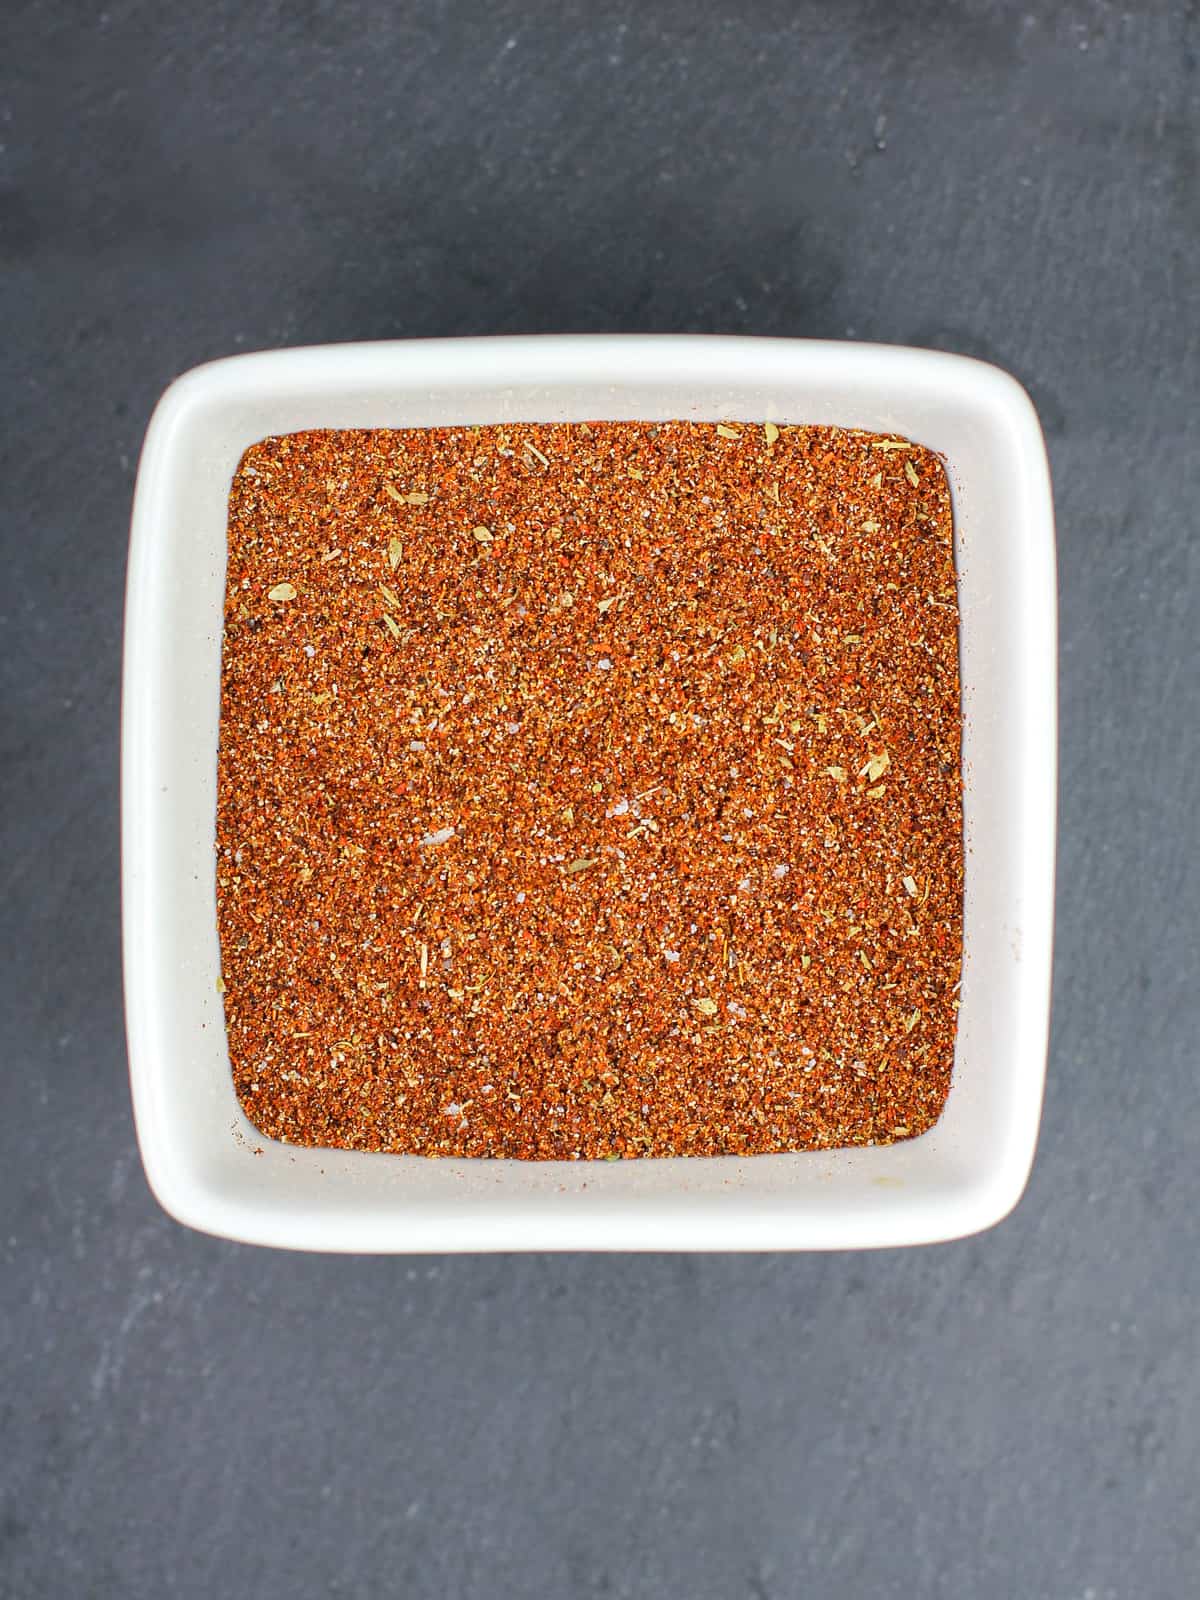 white square bowl filled with taco seasoning mix